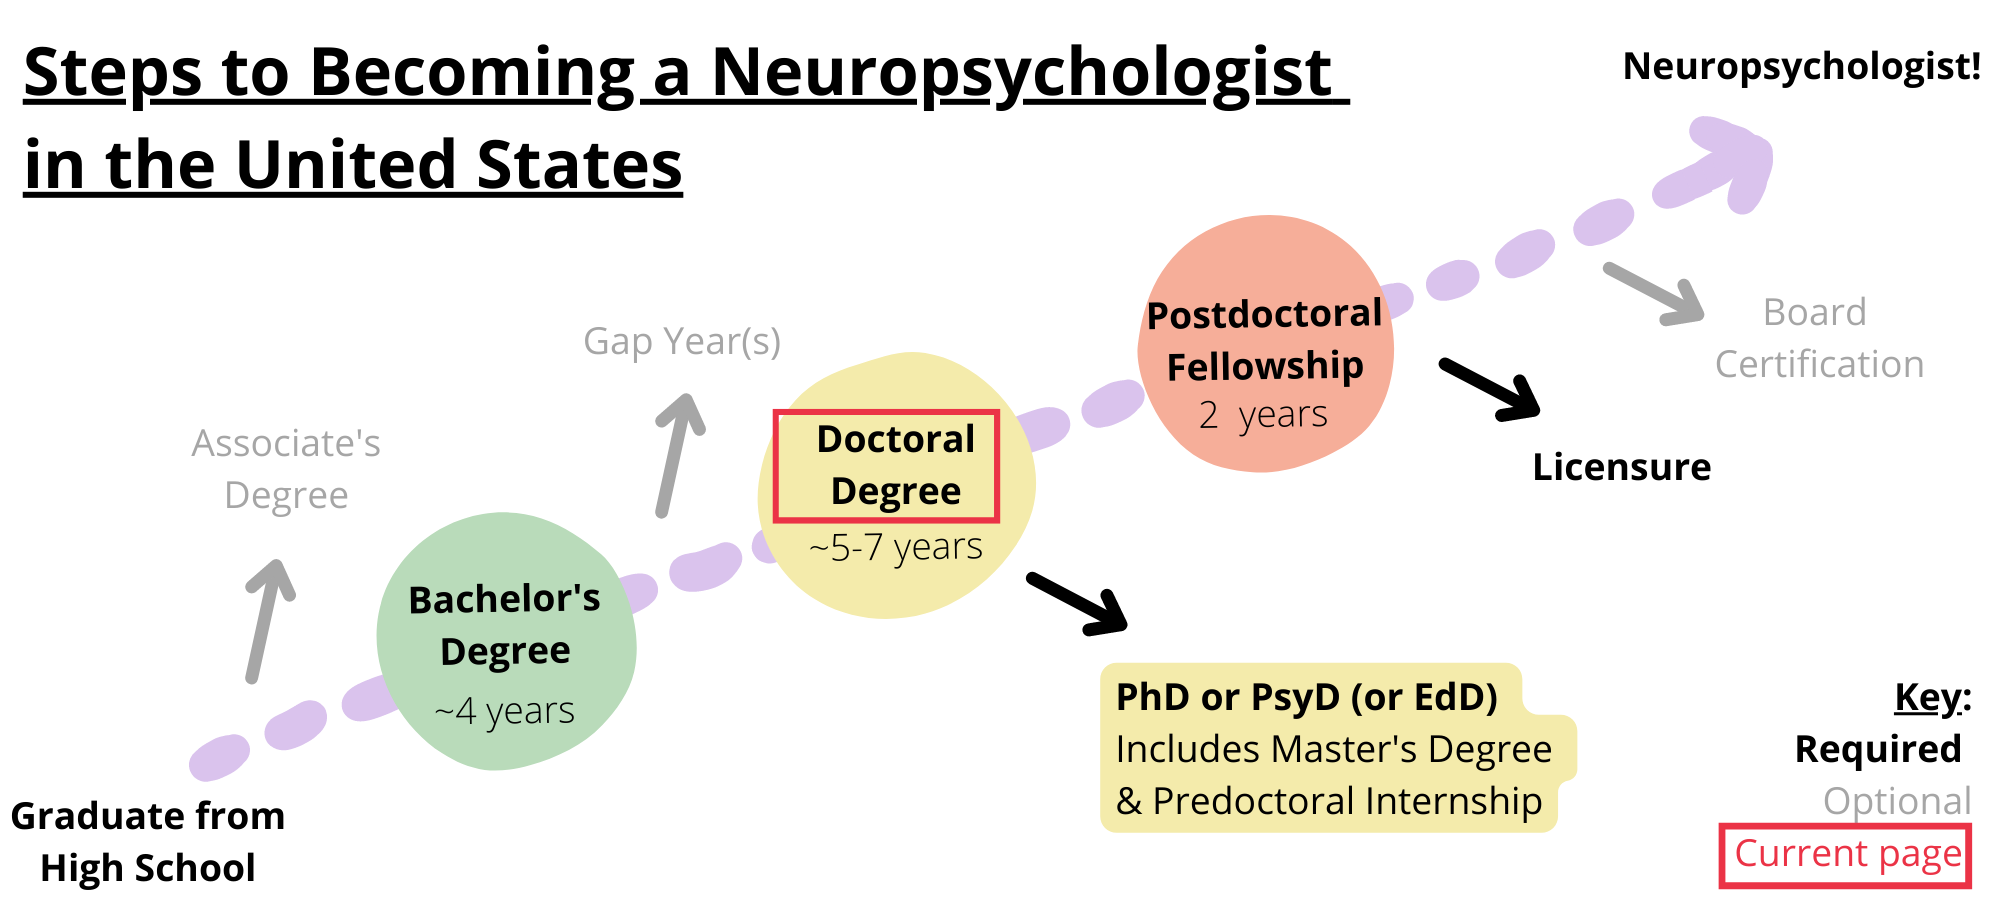 Steps to becoming a neuropsychologist in the United States. Required steps include graduating from high school, obtaining a bachelor’s degree, obtaining a doctoral degree like a PhD, PsyD, or EdD, completing a postdoctoral fellowship, and licensure. Optional steps include obtaining an associate’s degree, taking a gap year, and board certification. You are on the step doctoral degree